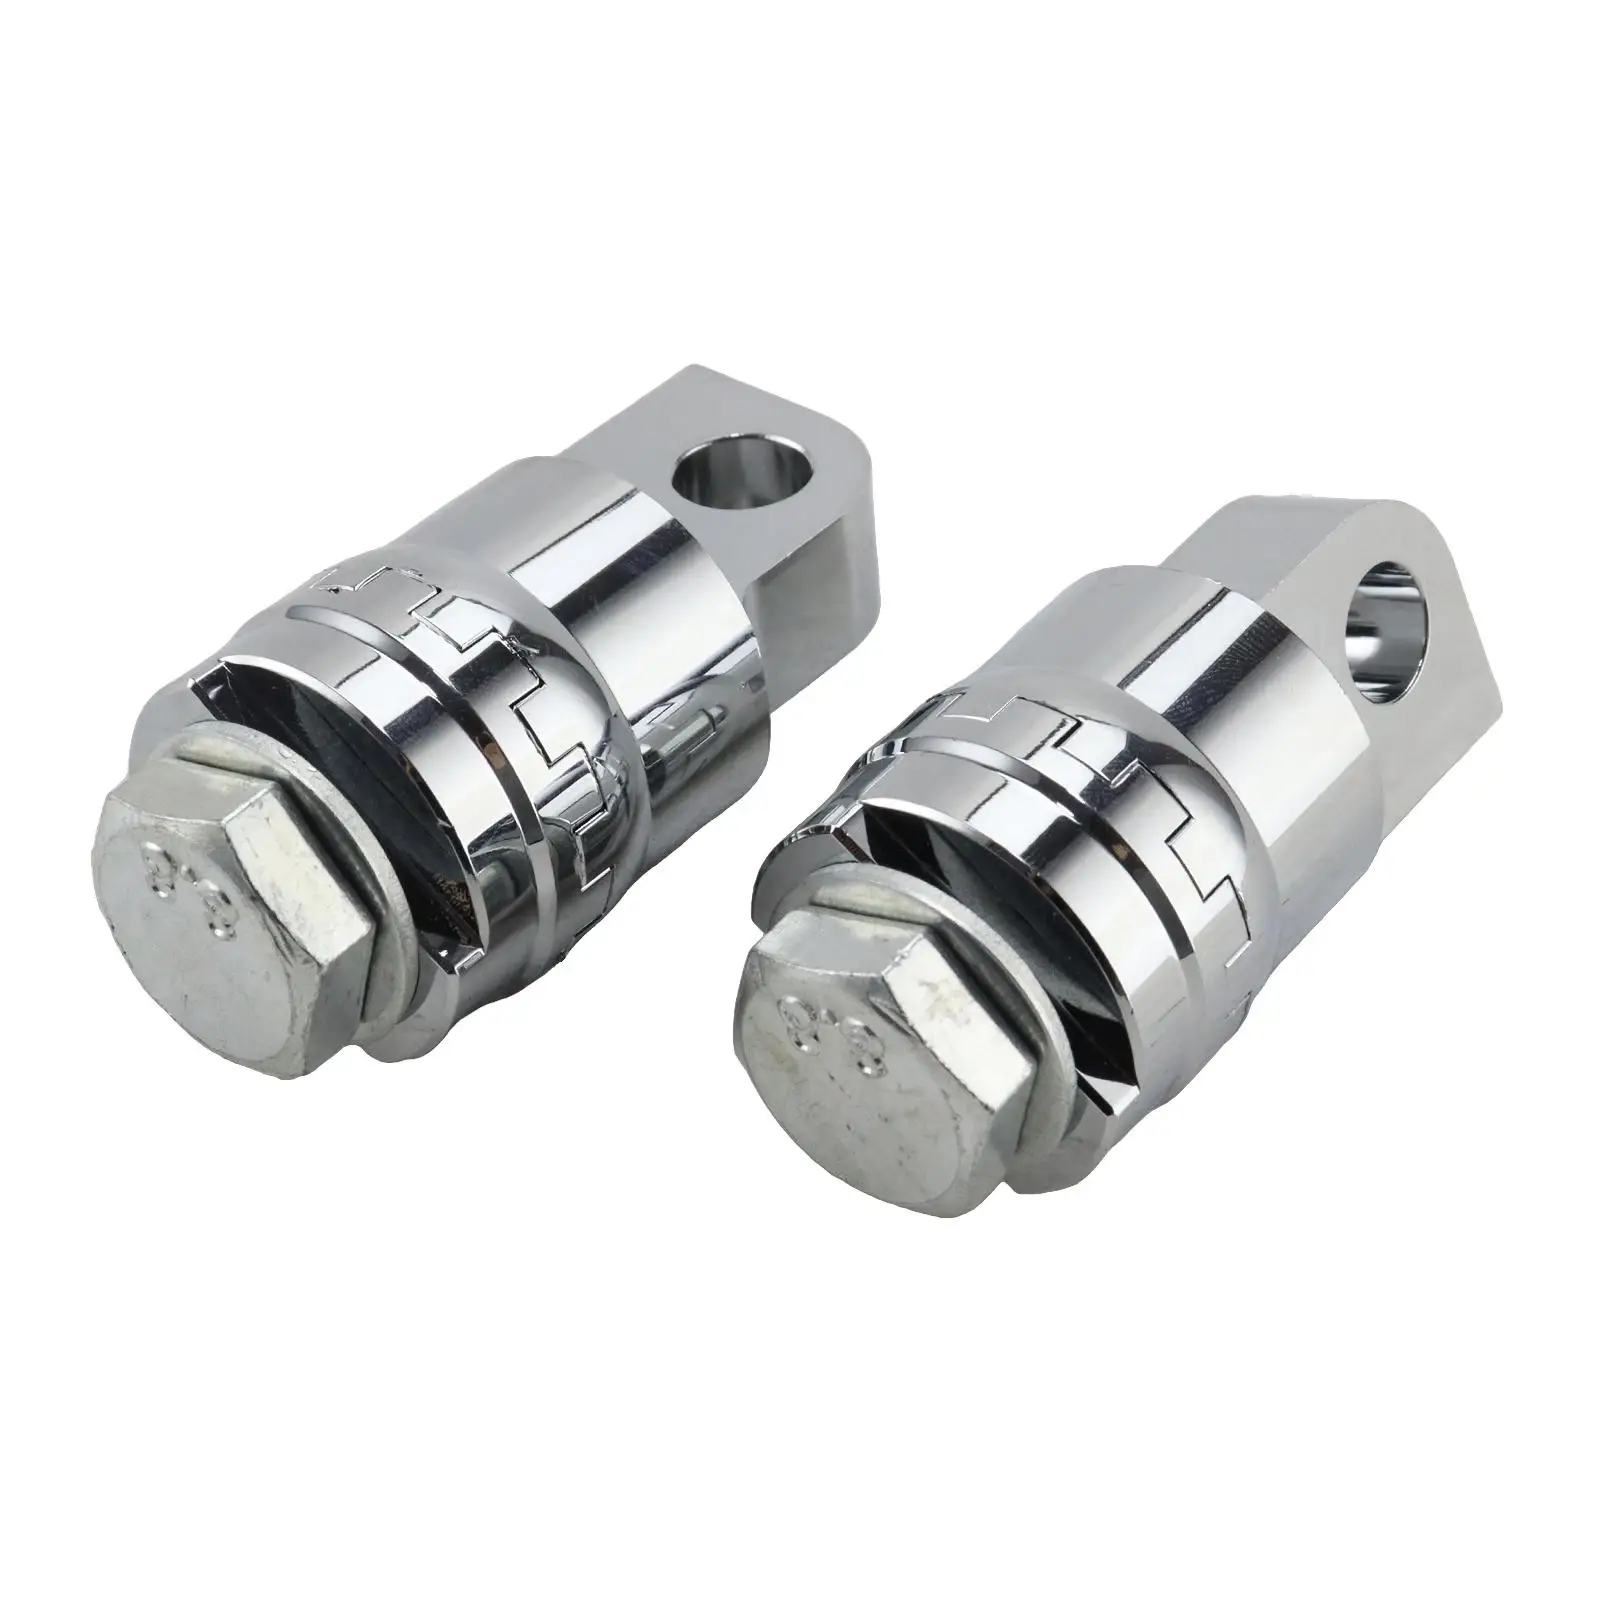 

2 Pieces Motorcycle Foot Pegs Male fits Accessory Aluminum Chrome Direct Replaces